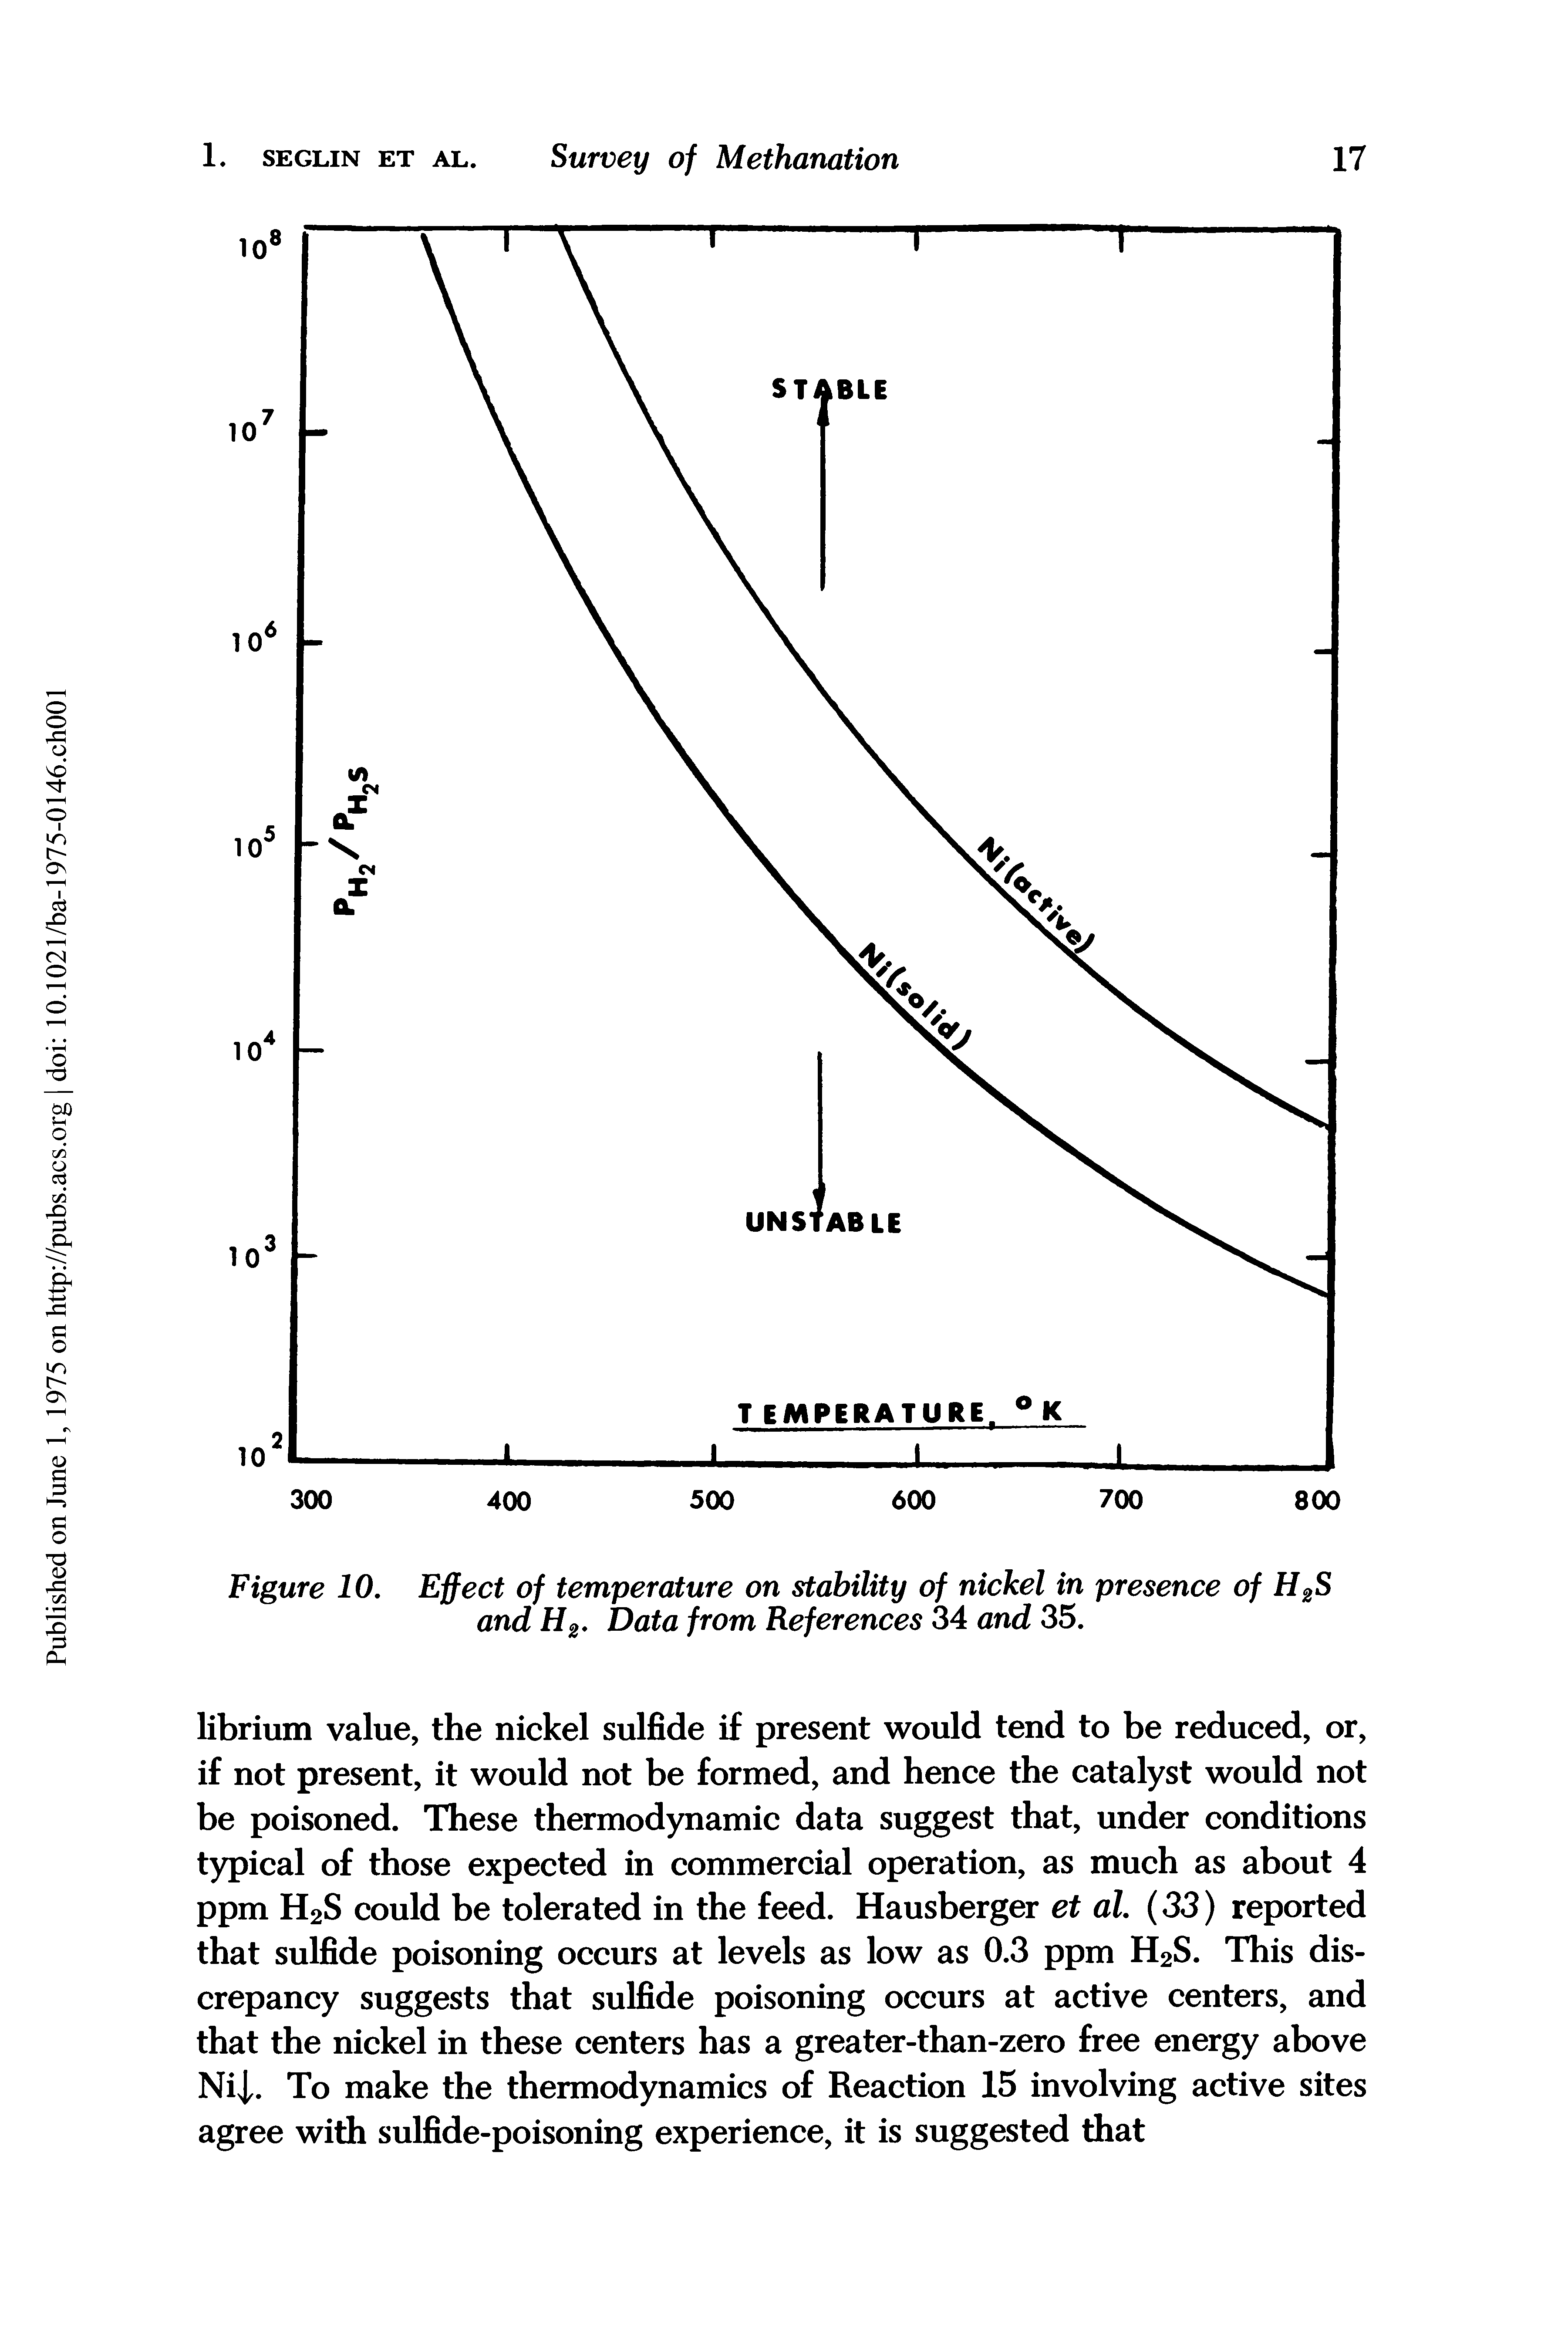 Figure 10. Effect of temperature on stability of nickel in presence of H2S and H2. Data from References 34 and 35.